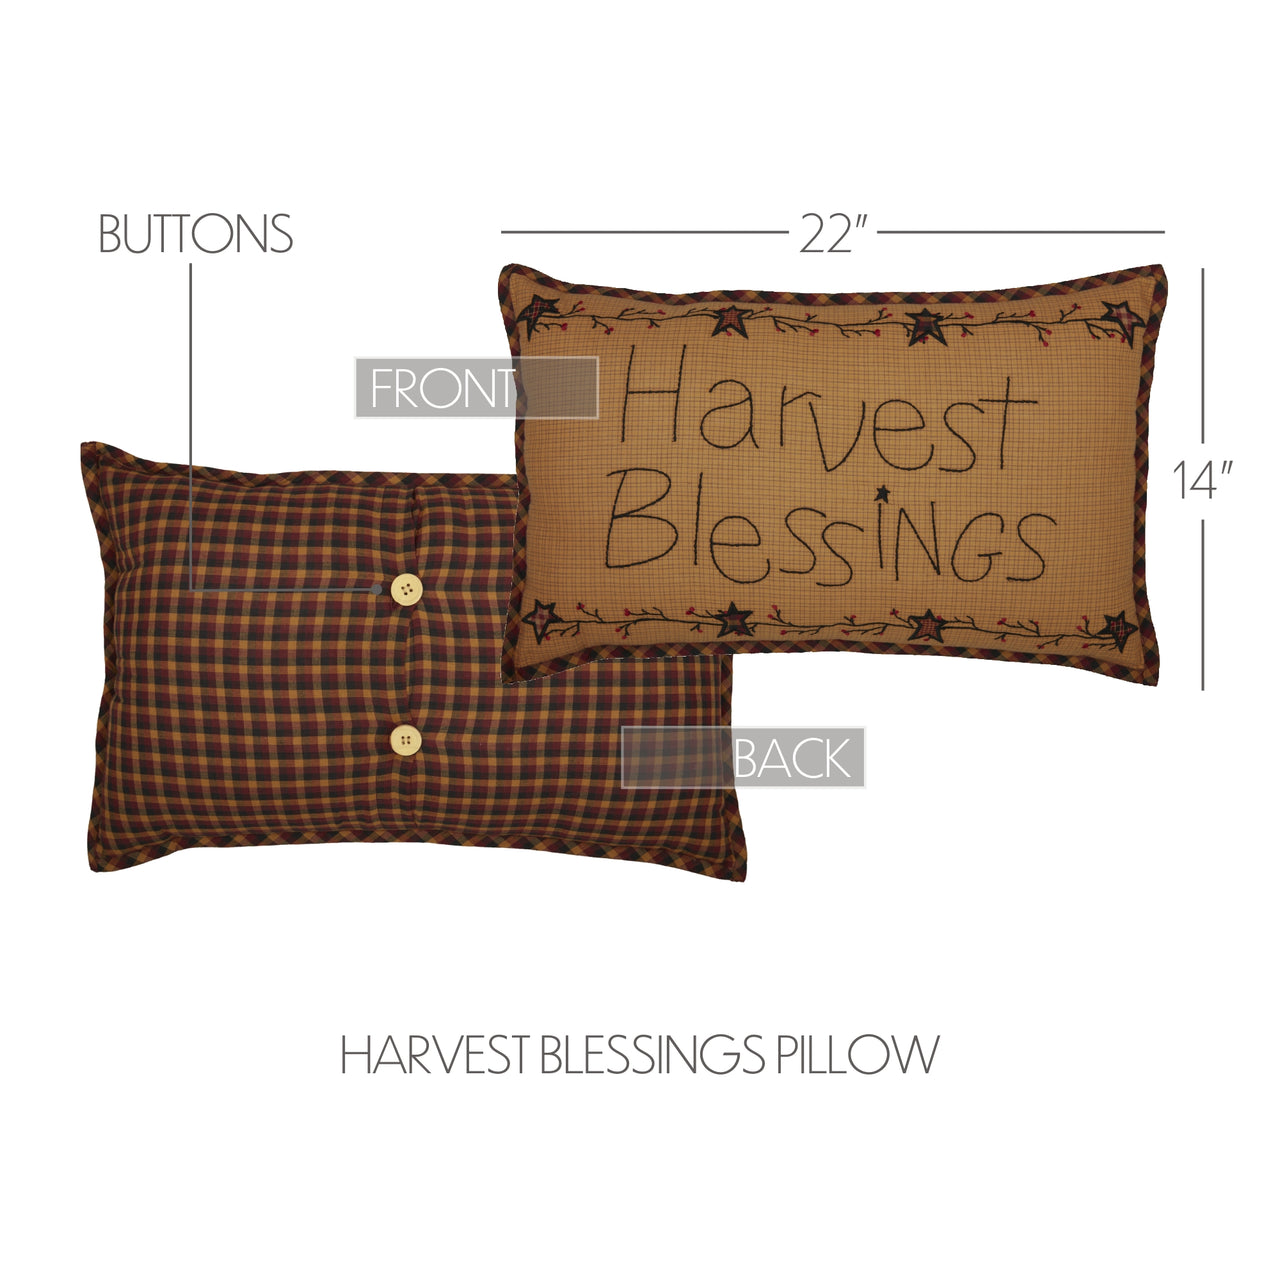 Heritage Farms Harvest Blessings Pillow 14x22 VHC Brands